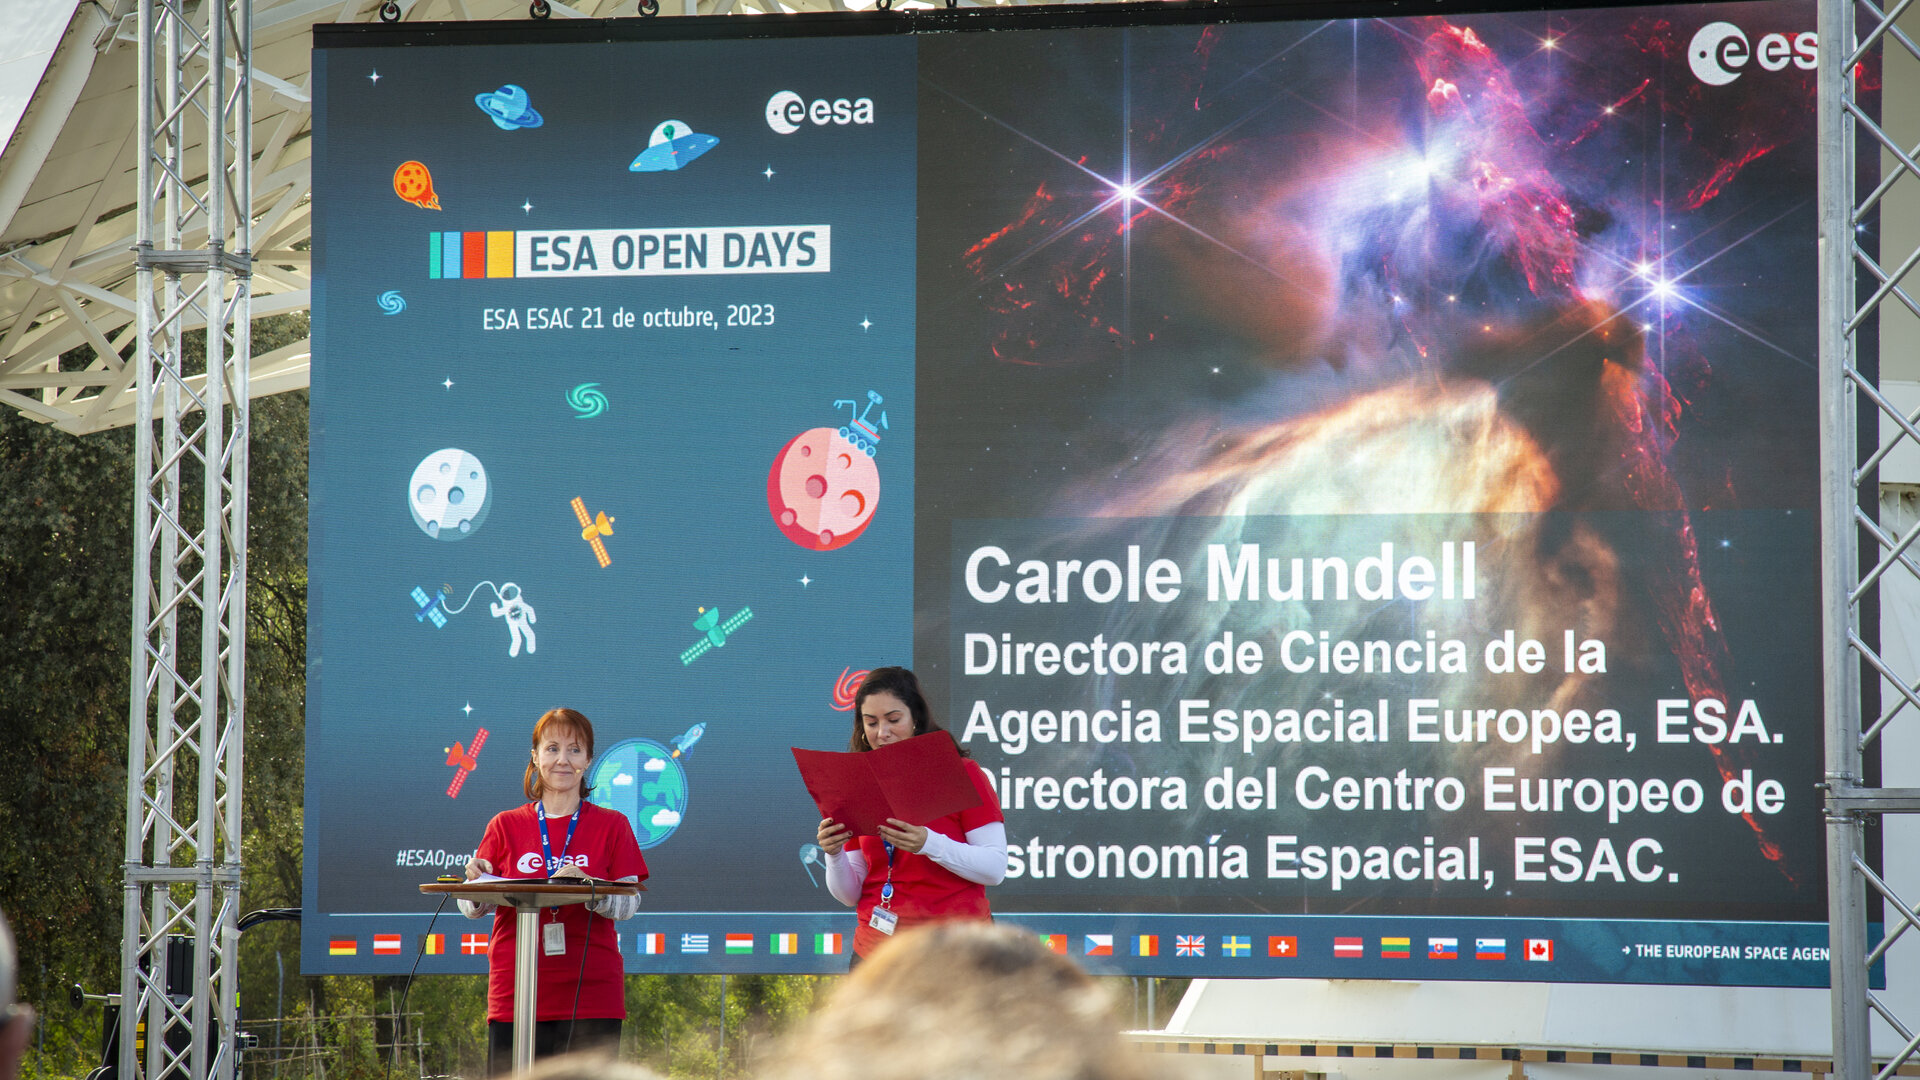 ESA Open Day 2023 at ESAC - Carole Mundell, ESA Director of Science and Head of ESAC